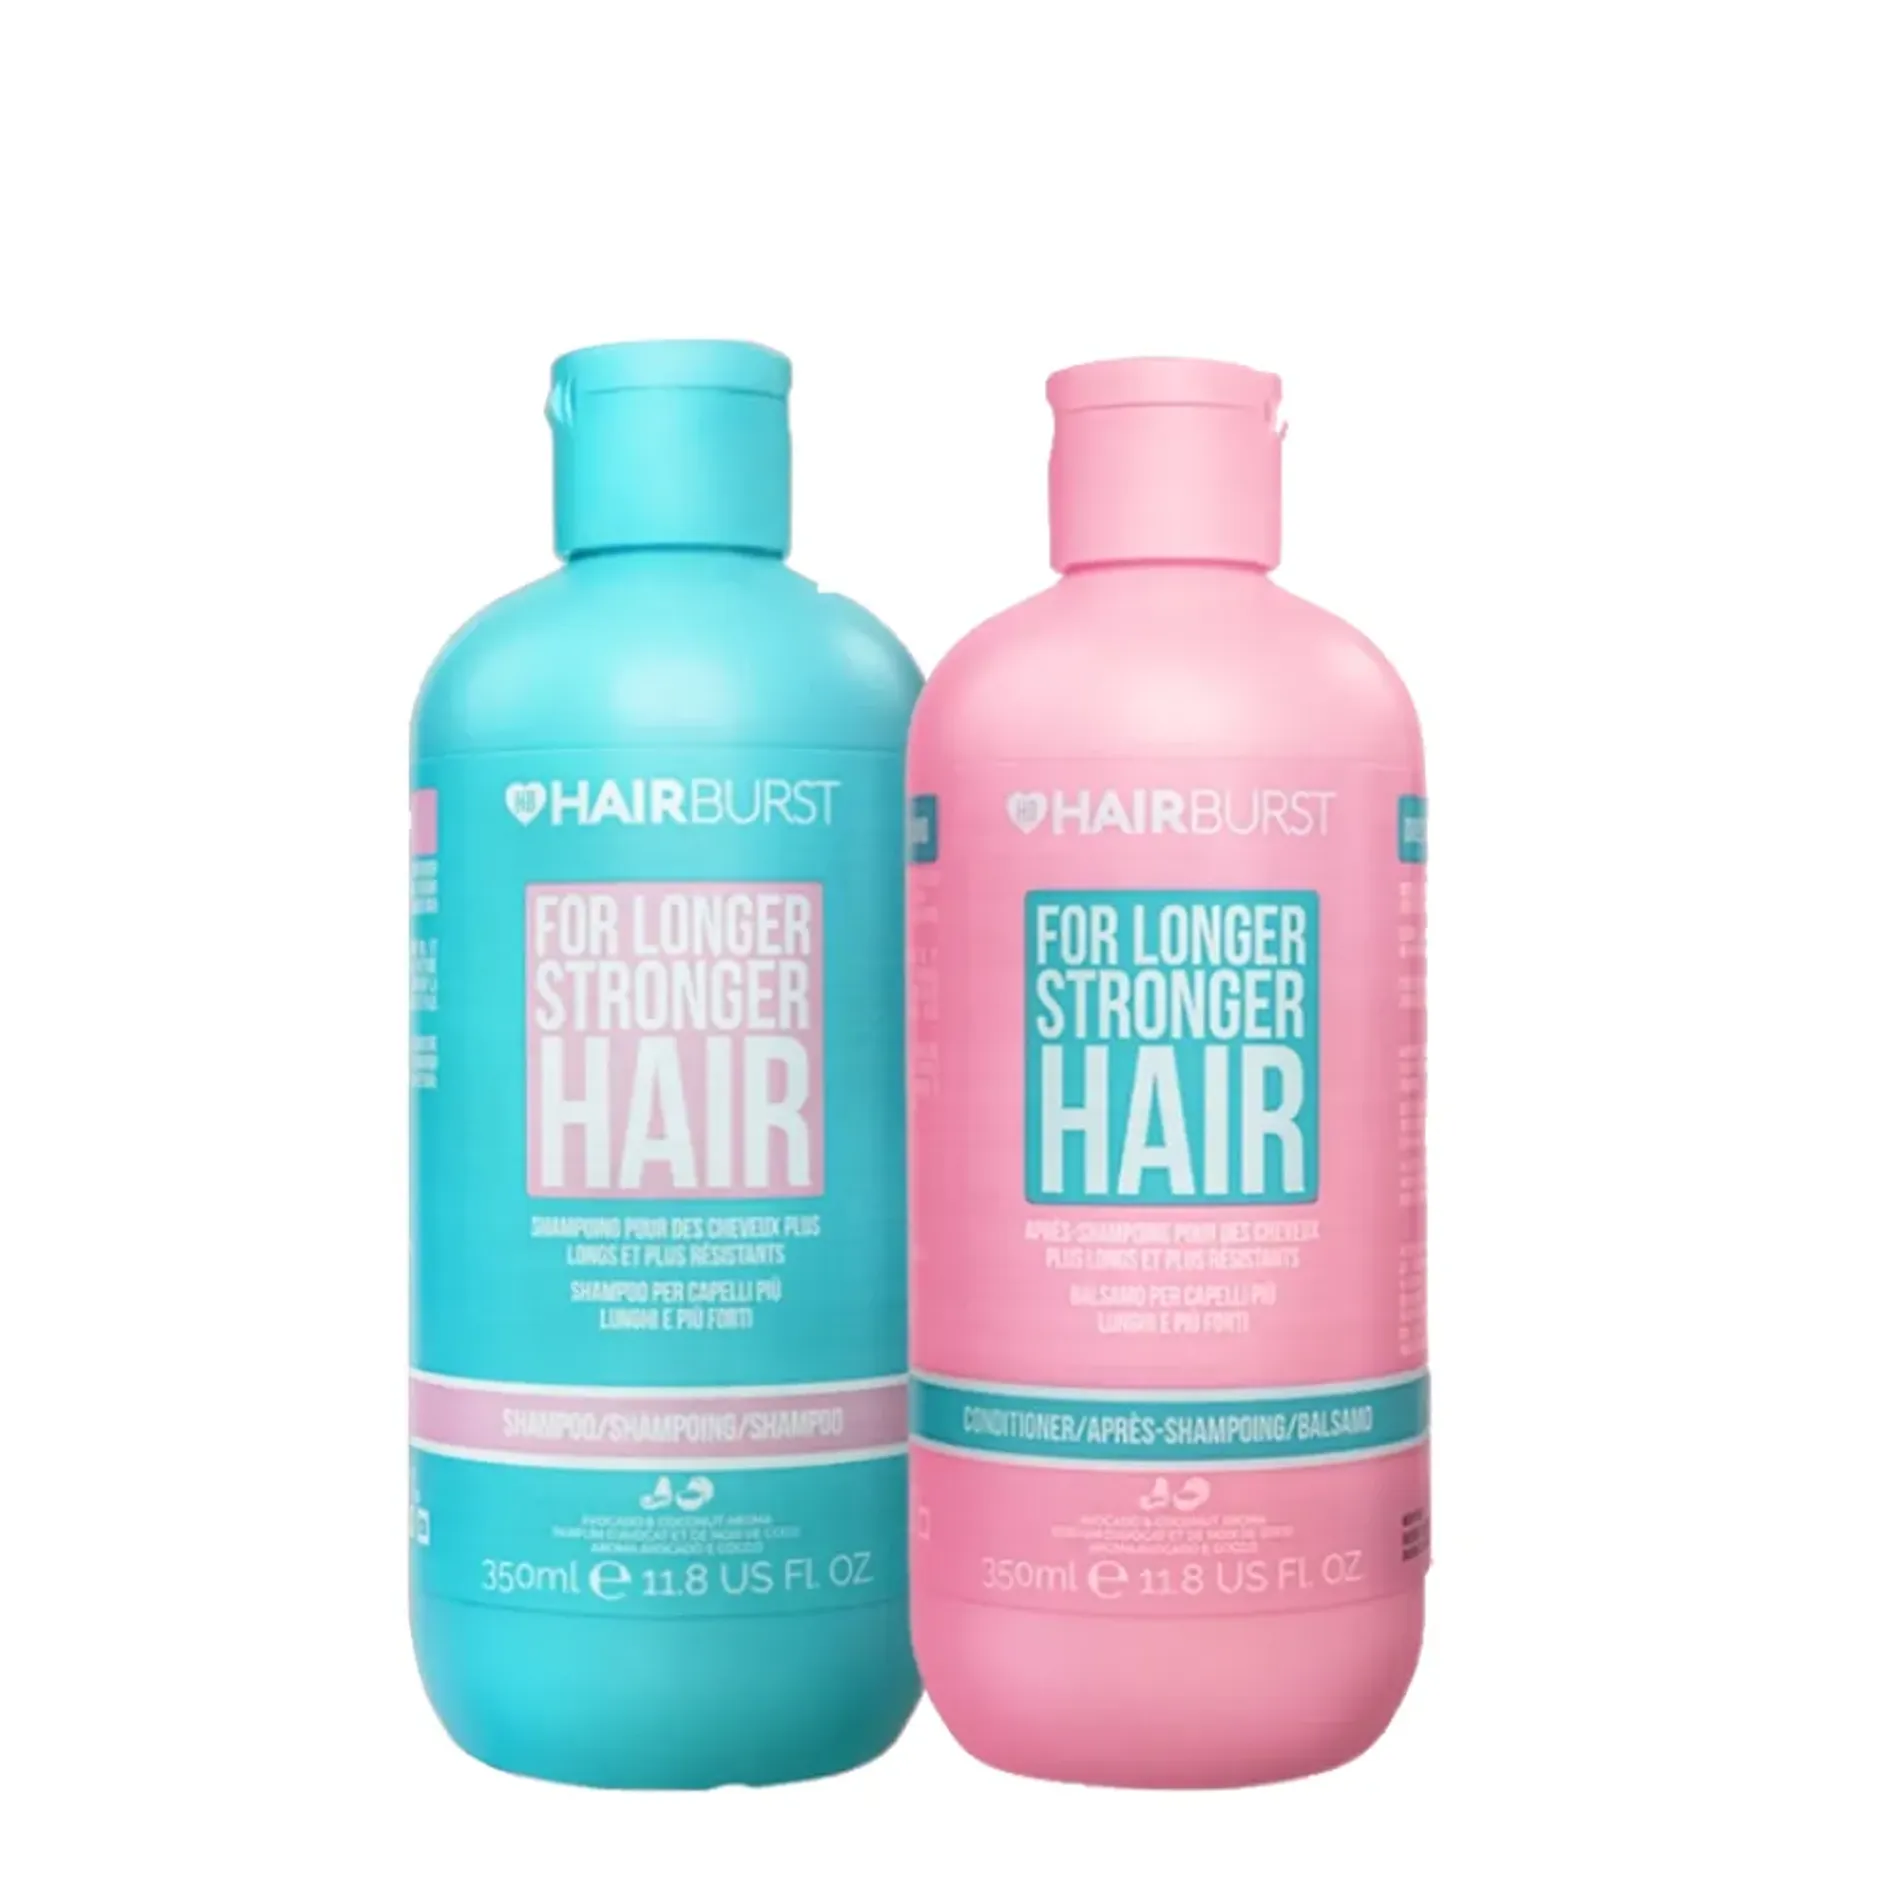 set-goi-xa-kich-thich-moc-toc-hairburst-for-longer-and-stronger-hair-1